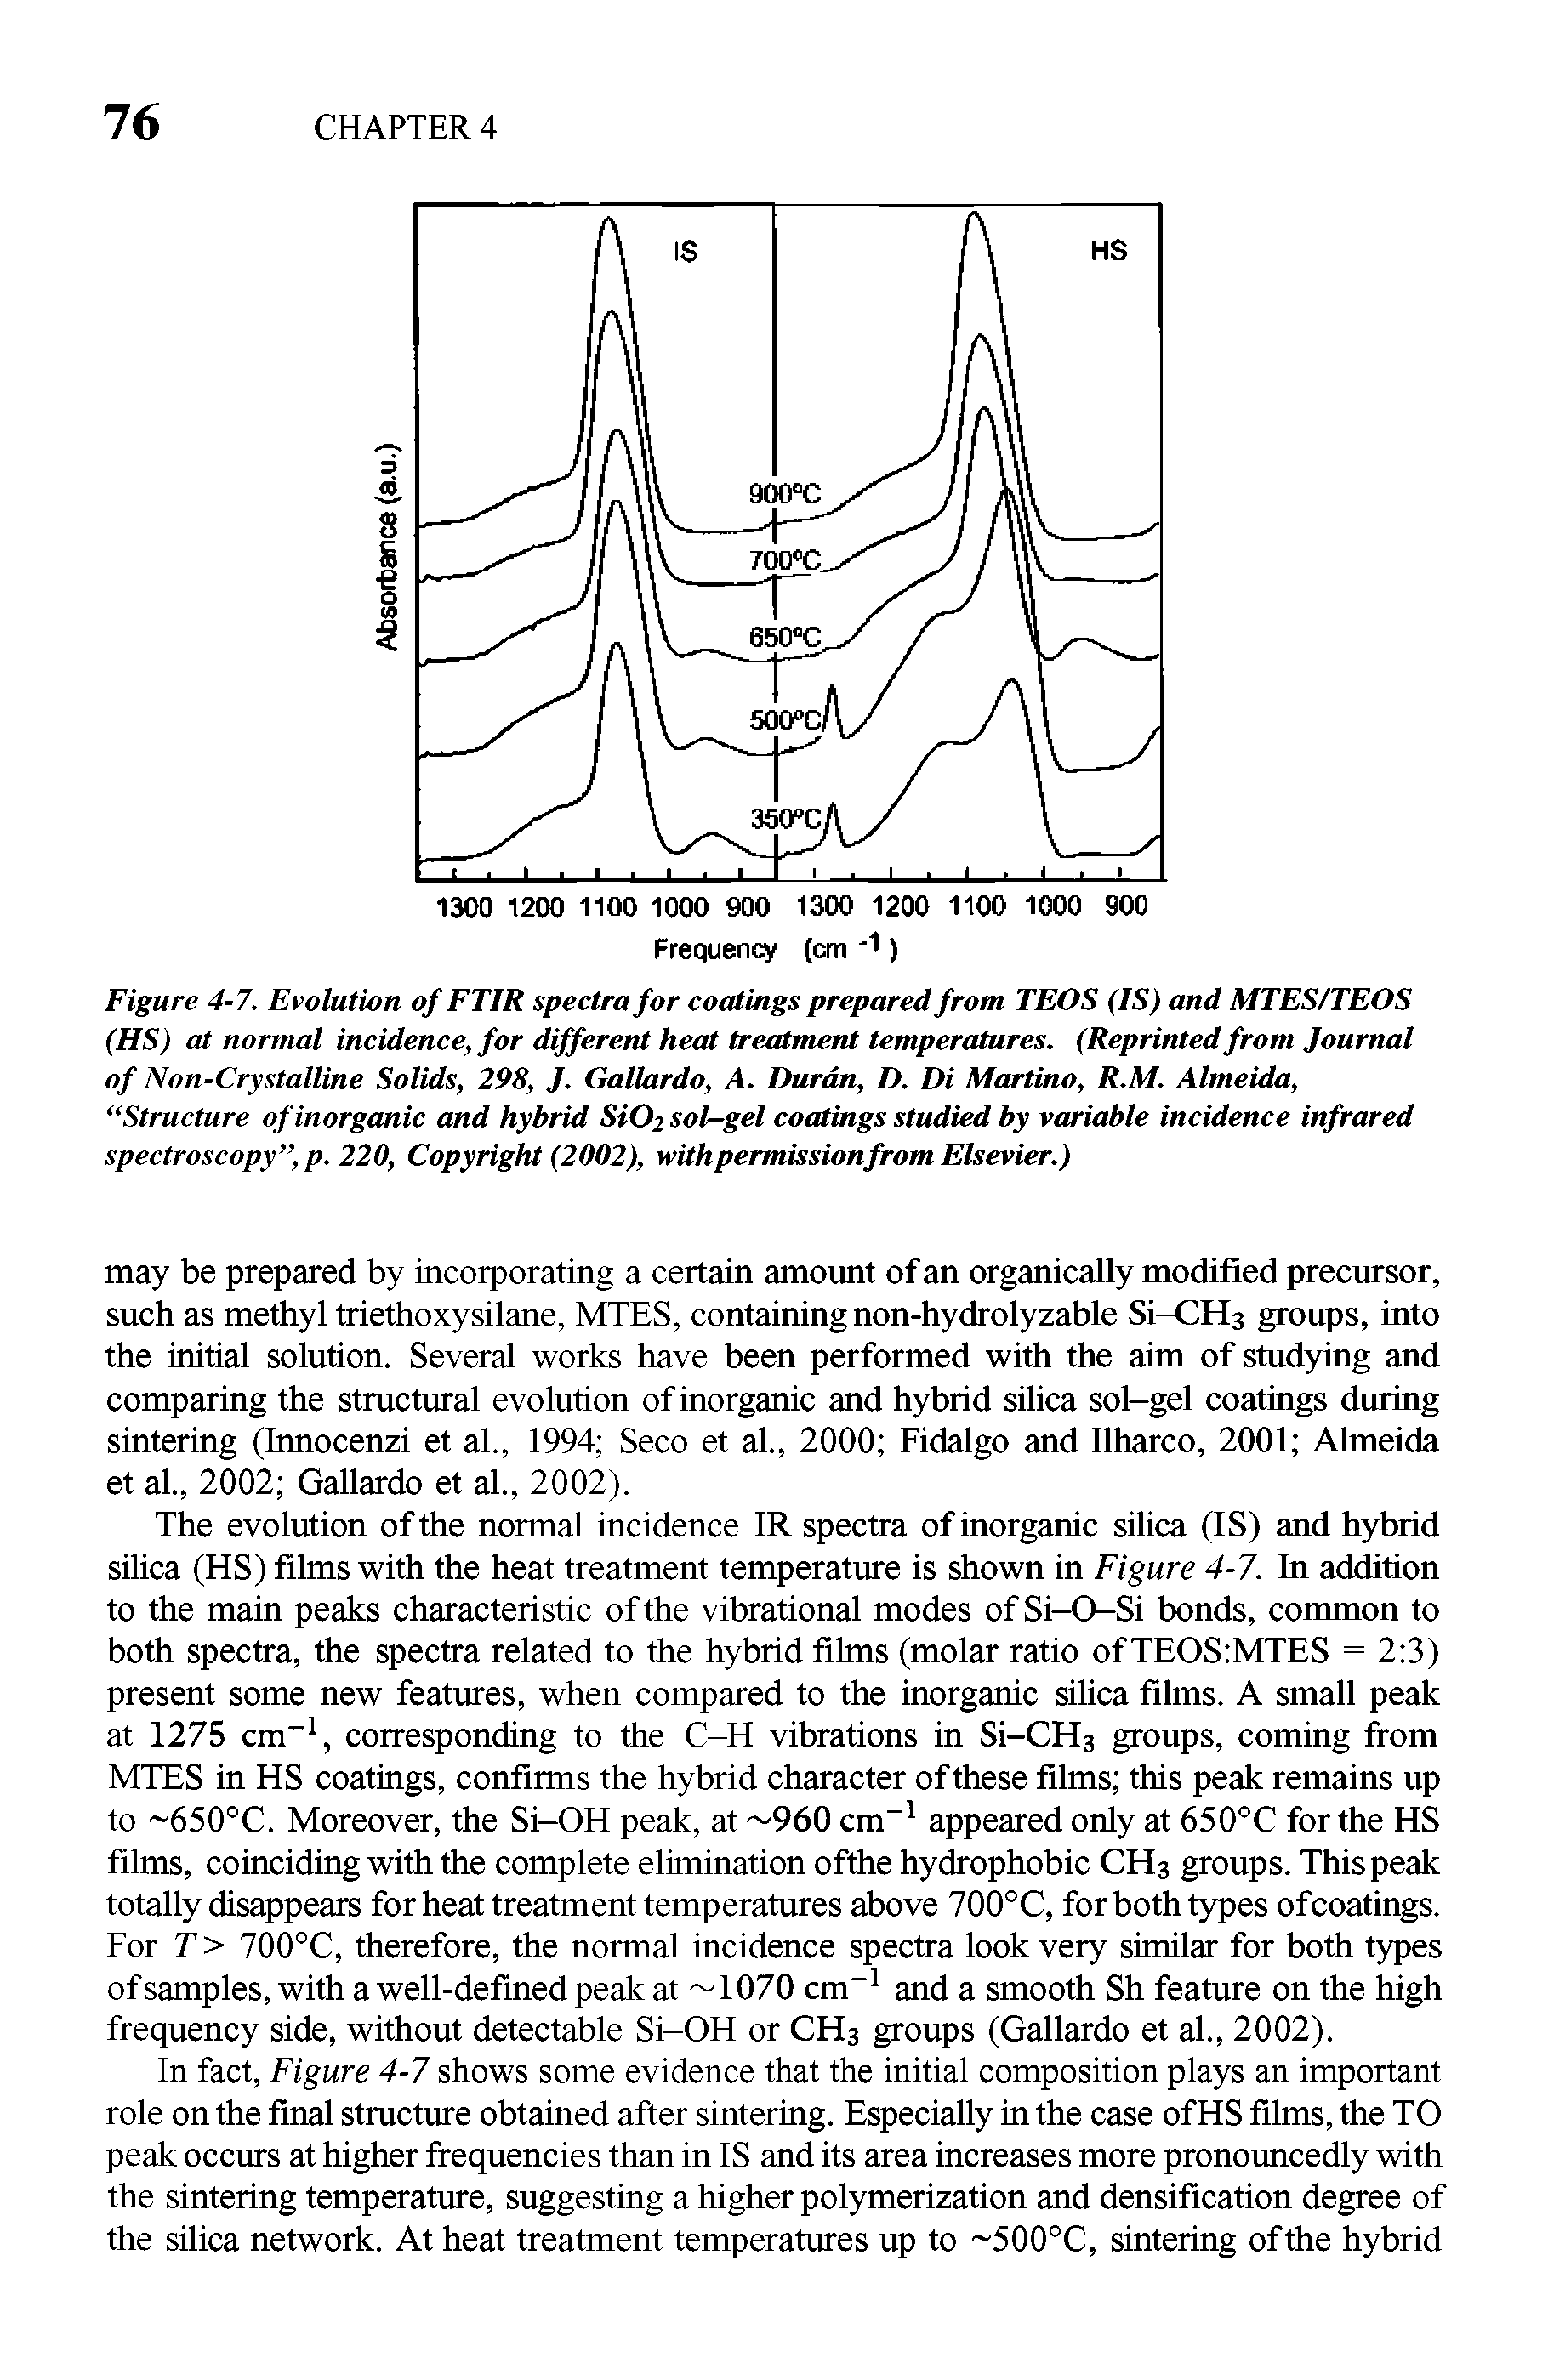 Figure 4-7. Evolution of FTIR spectra for coatings prepared from TEOS (IS) and MTES/TEOS (HS) at normal incidence, for different heat treatment temperatures. (Reprinted from Journal of Non-Crystalline Solids, 298, J. Gallardo, A. Duran, D. Di Martino, R.M. Almeida, Structure of inorganic and hybrid Si02 sol-gel coatings studied by variable incidence infrared spectroscopy , p. 220, Copyright (2002), with permission from Elsevier.)...